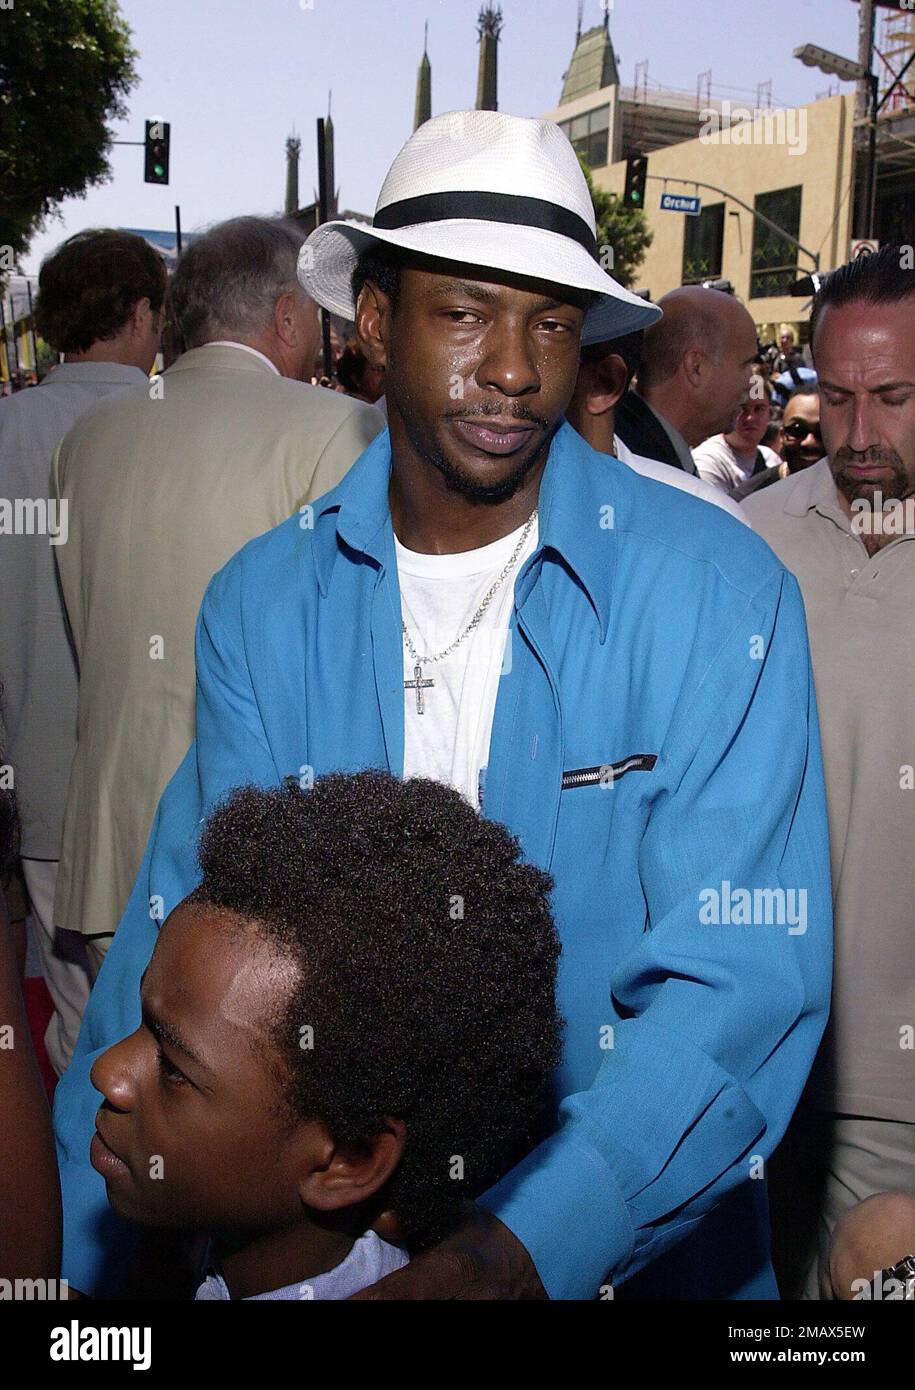 Bobby Brown  -  Whitney Houston produced the movie - arriving at the 'Princess Diaries' premiere at El captain Theatre in Los Angeles  July, 29, 2001           -            BrownBobby01A.jpgEvent in Hollywood Life - California, Red Carpet Event, USA, Film Industry, Celebrities, Photography, Bestof, Arts Culture and Entertainment, Topix Celebrities fashion, Best of, Hollywood Life, Event in Hollywood Life - California, Red Carpet and backstage, , Music celebrities, Musician, Music Group, Topix, Bestof, Arts Culture and Entertainment, Photography, People from the cast, TV show and cast inquiry t Stock Photo